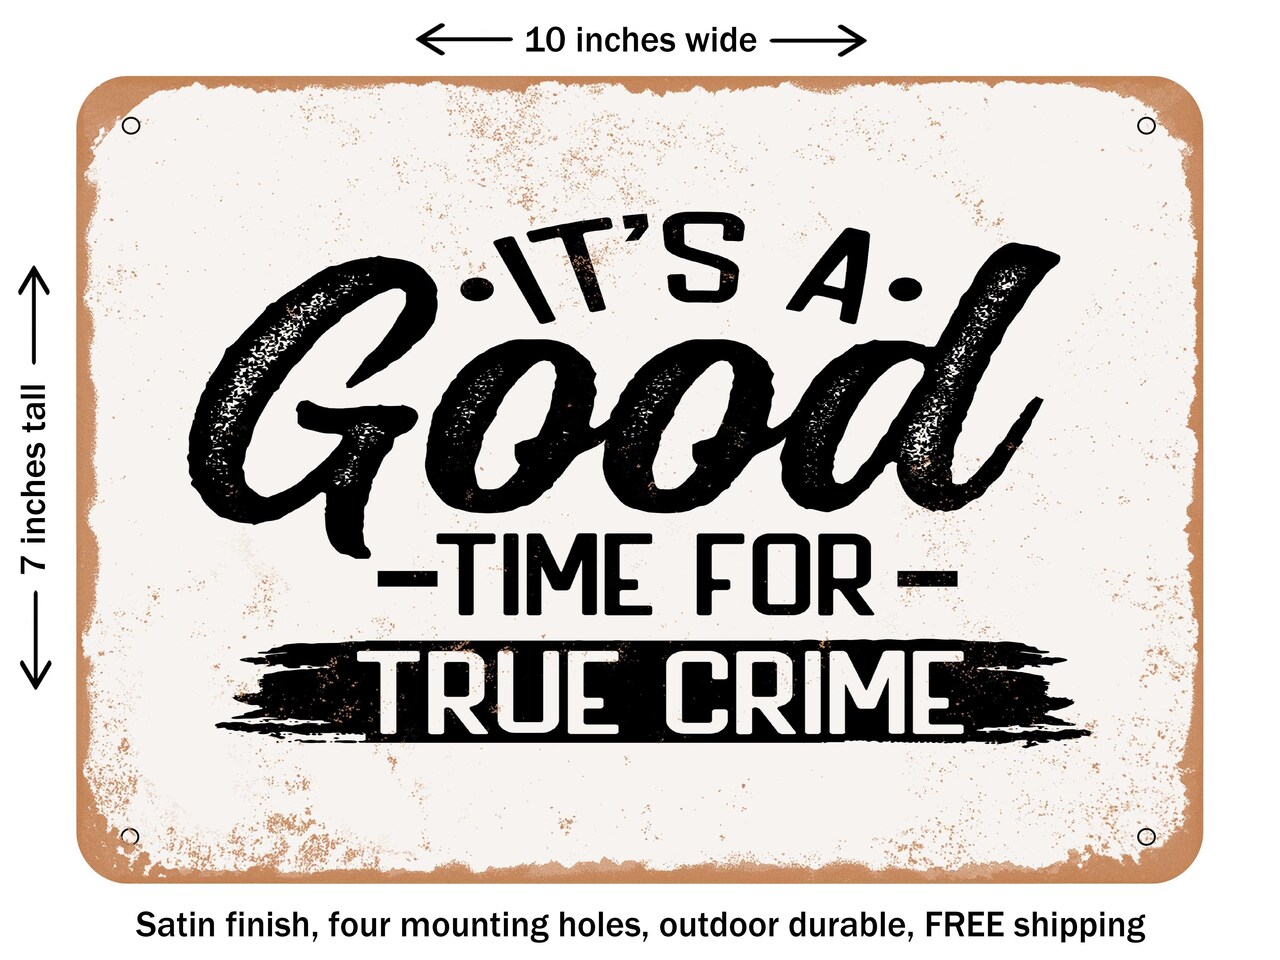 DECORATIVE METAL SIGN - Its a Good Time For True Crime - Vintage Rusty Look